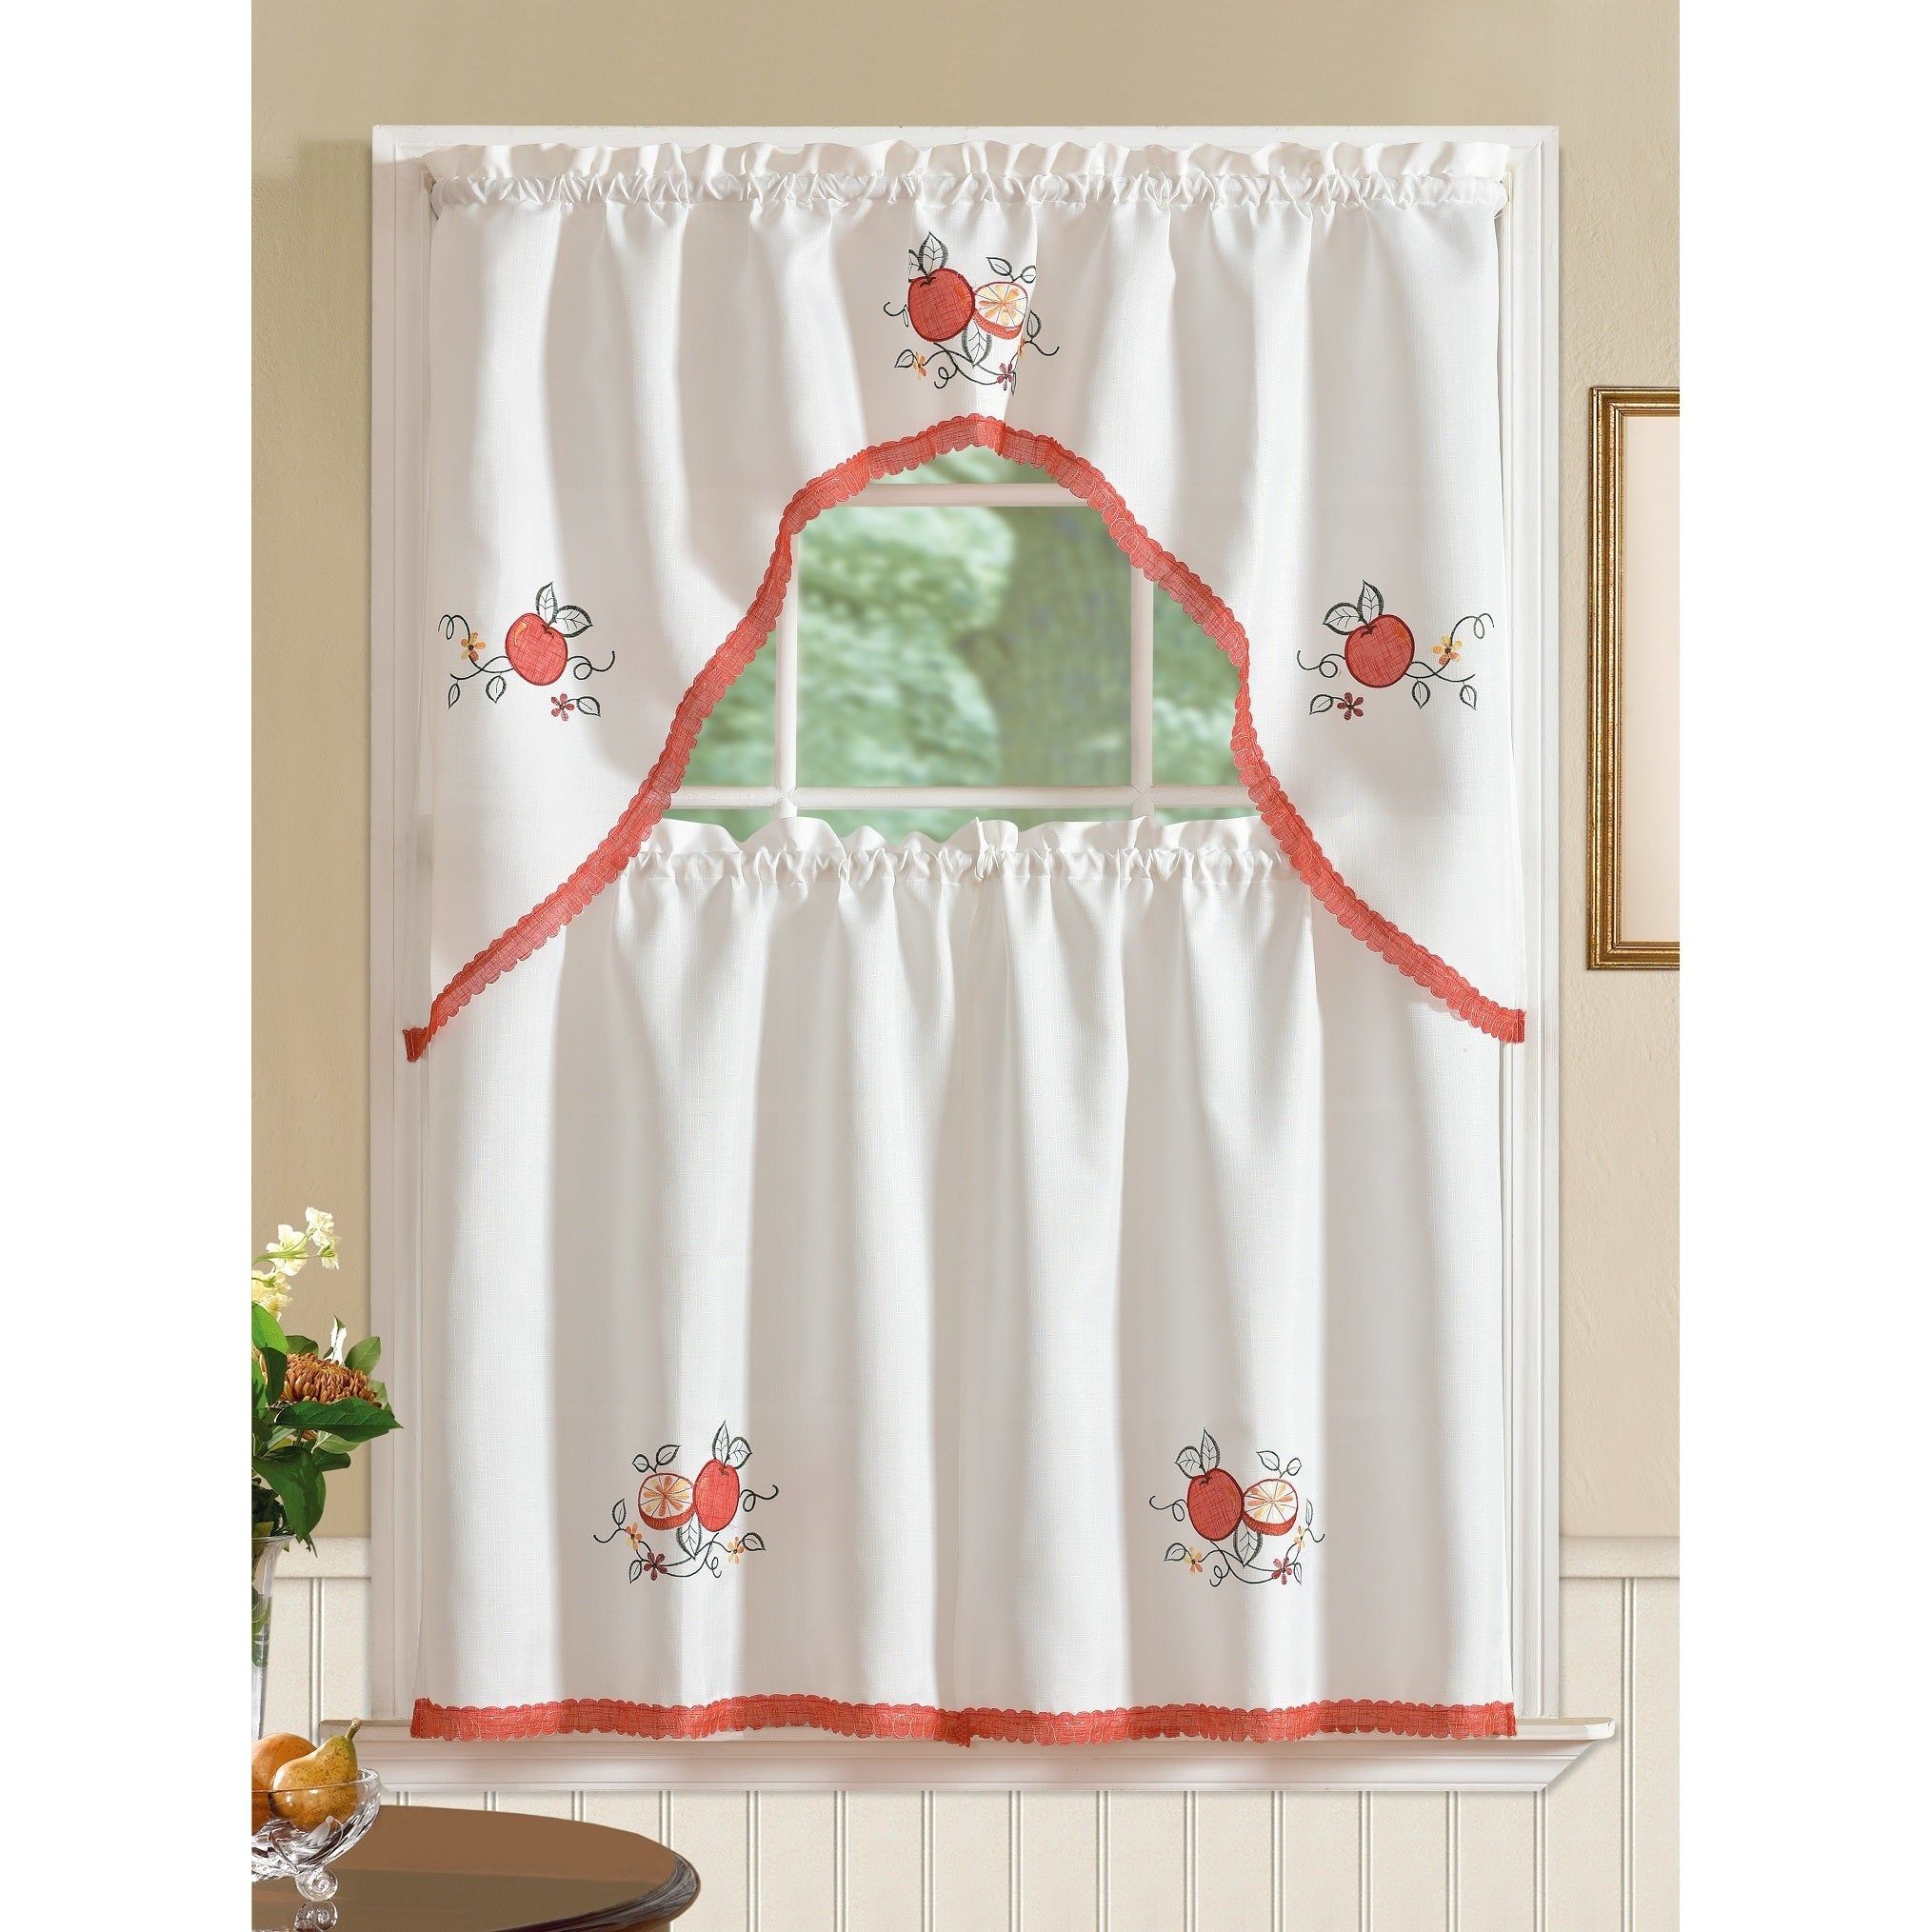 Details About Rt Designers Collection Regal Embroidered Tier And Valance Within Fluttering Butterfly White Embroidered Tier, Swag, Or Valance Kitchen Curtains (View 6 of 20)